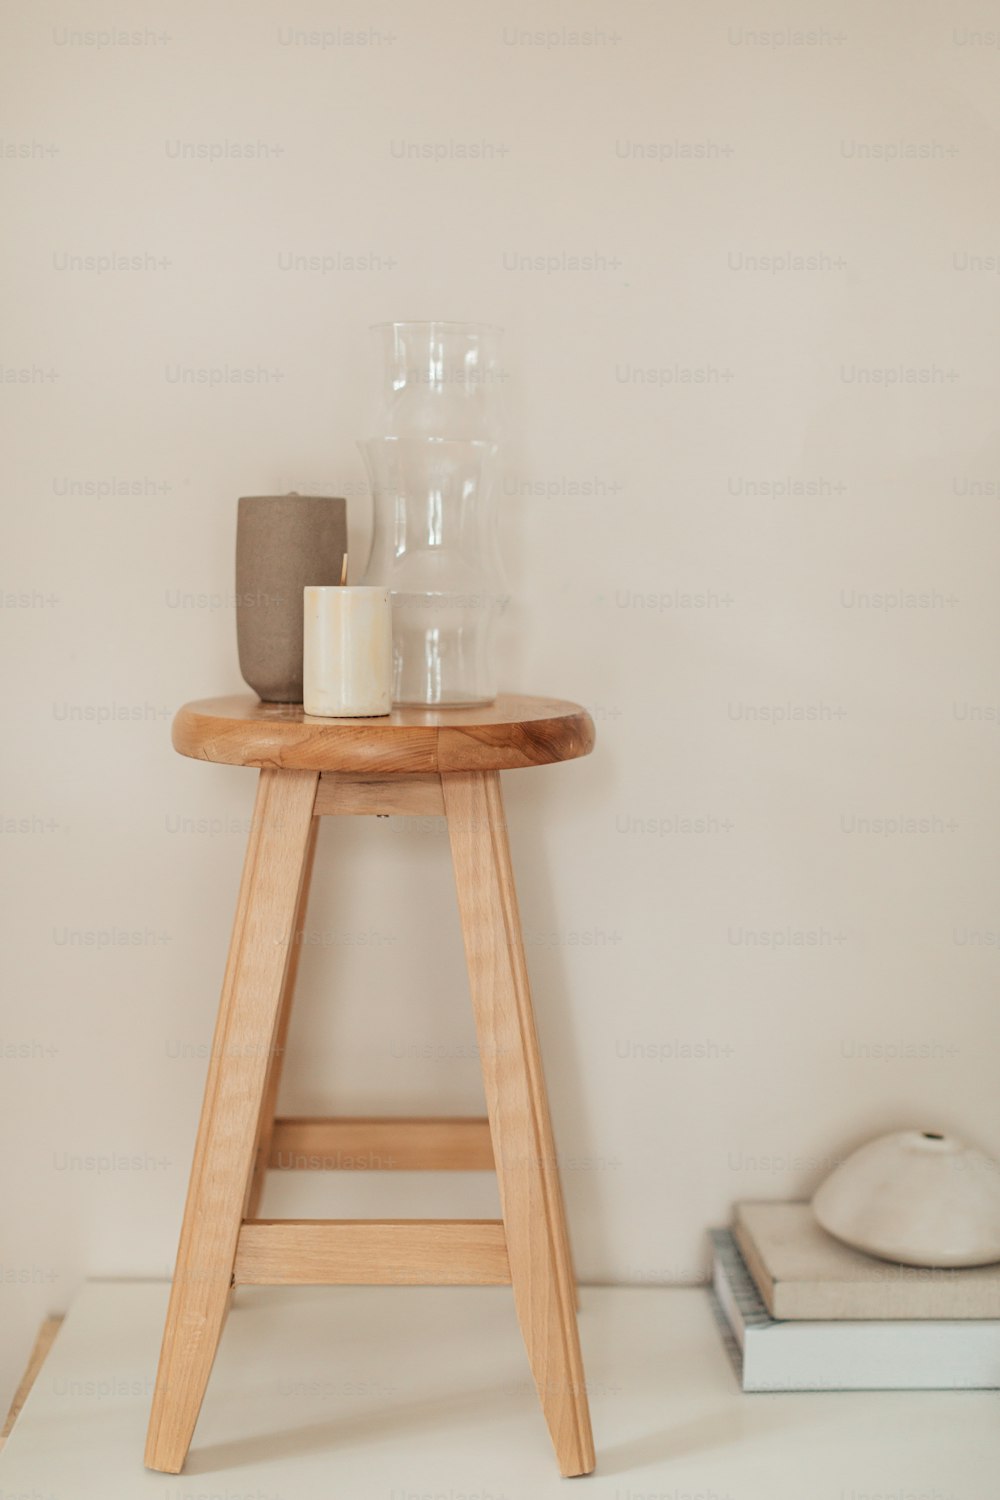 a wooden stool with a candle on top of it